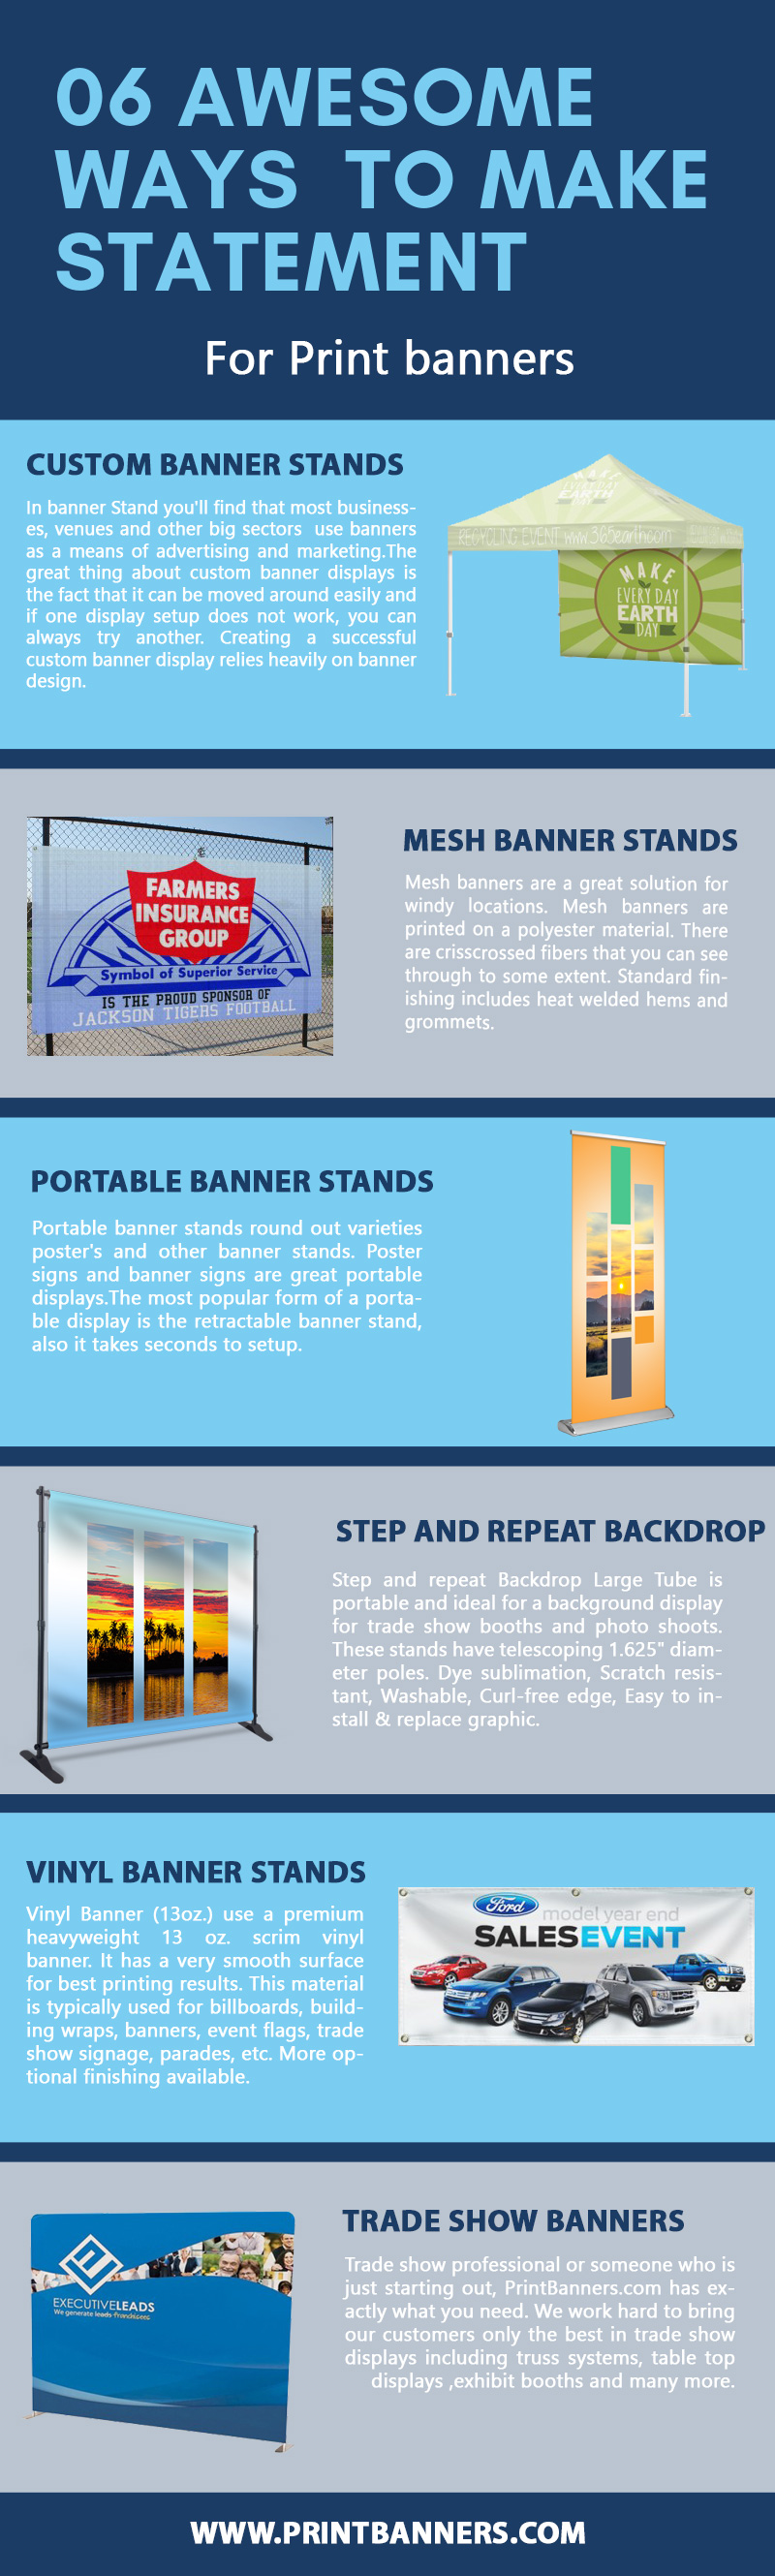 6 Awesome Ways to Make a Statement Infographic